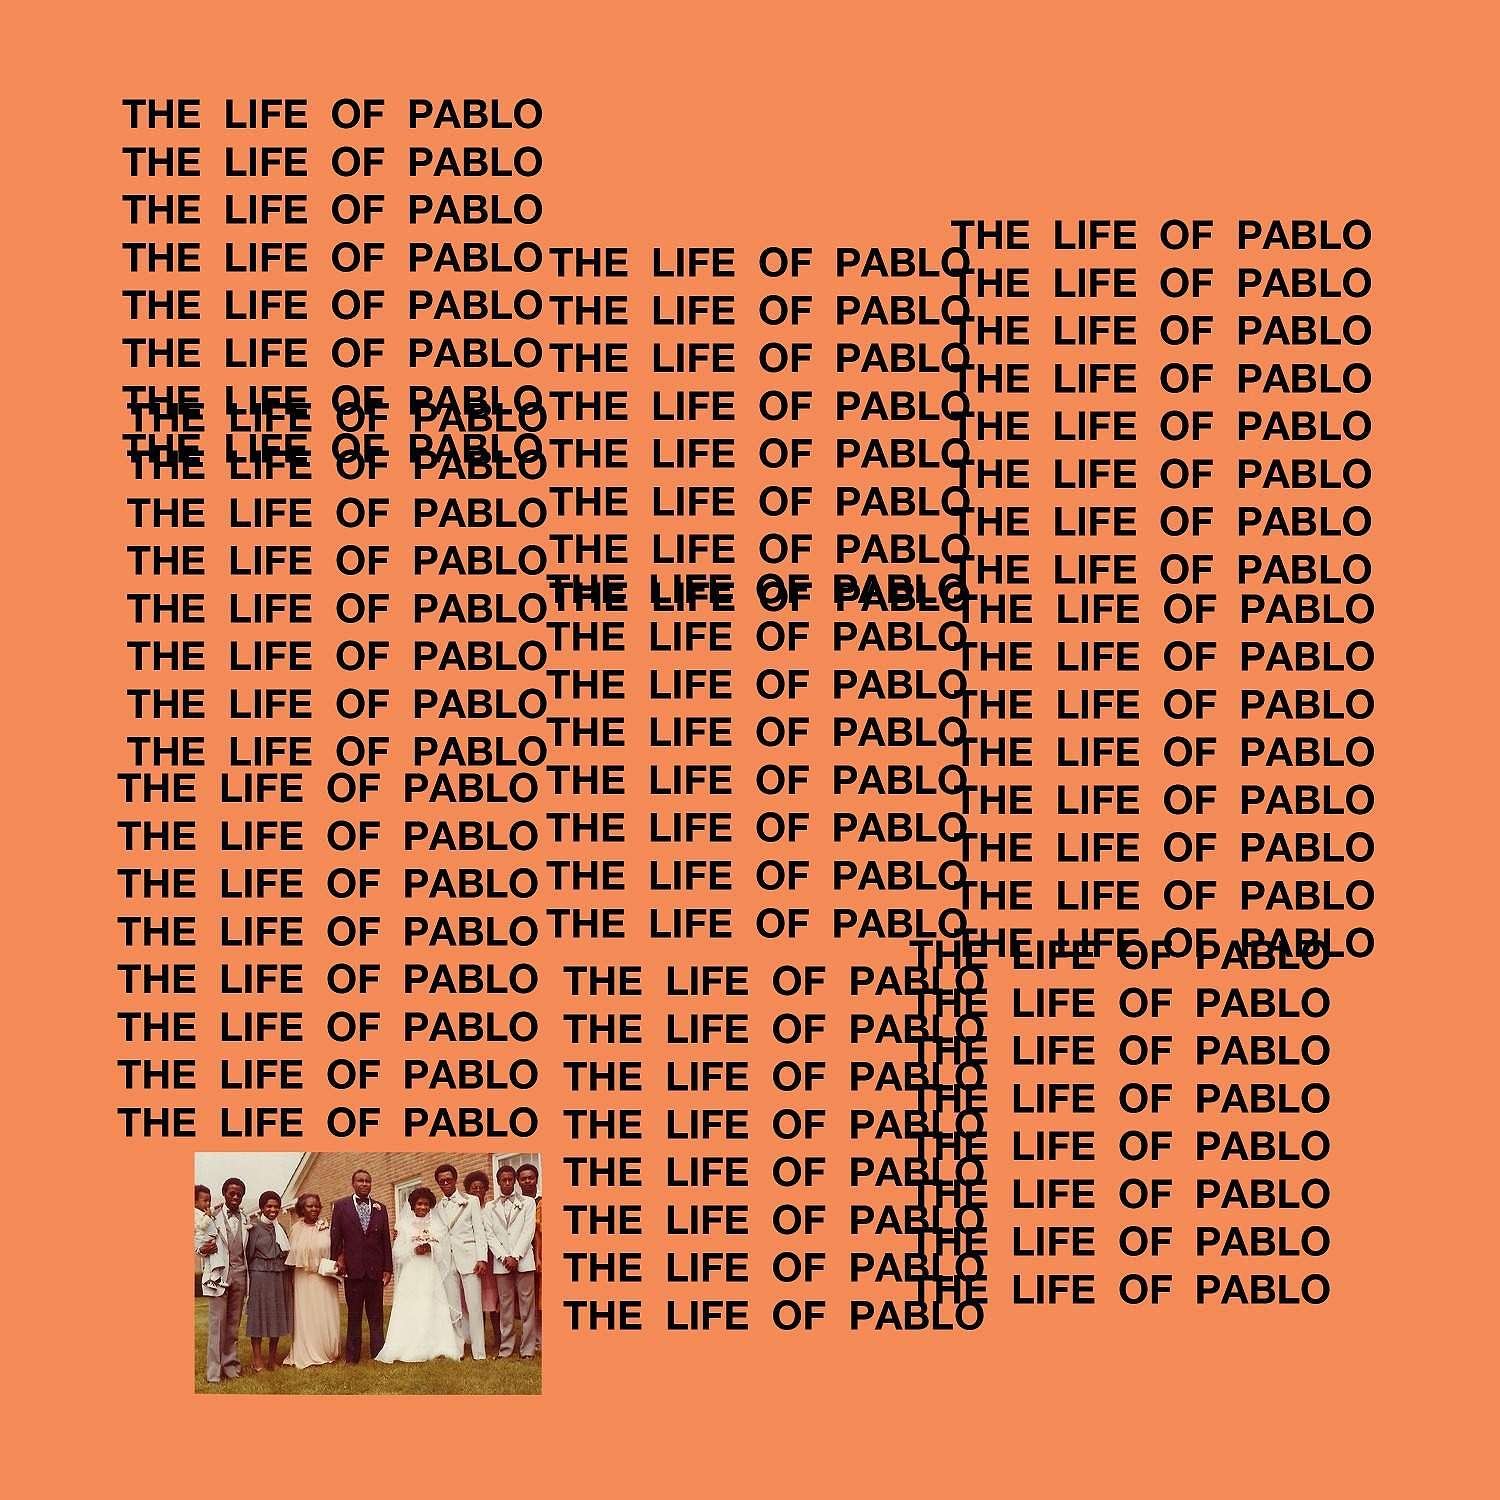 Album Review: The Life of Pablo by Kanye West